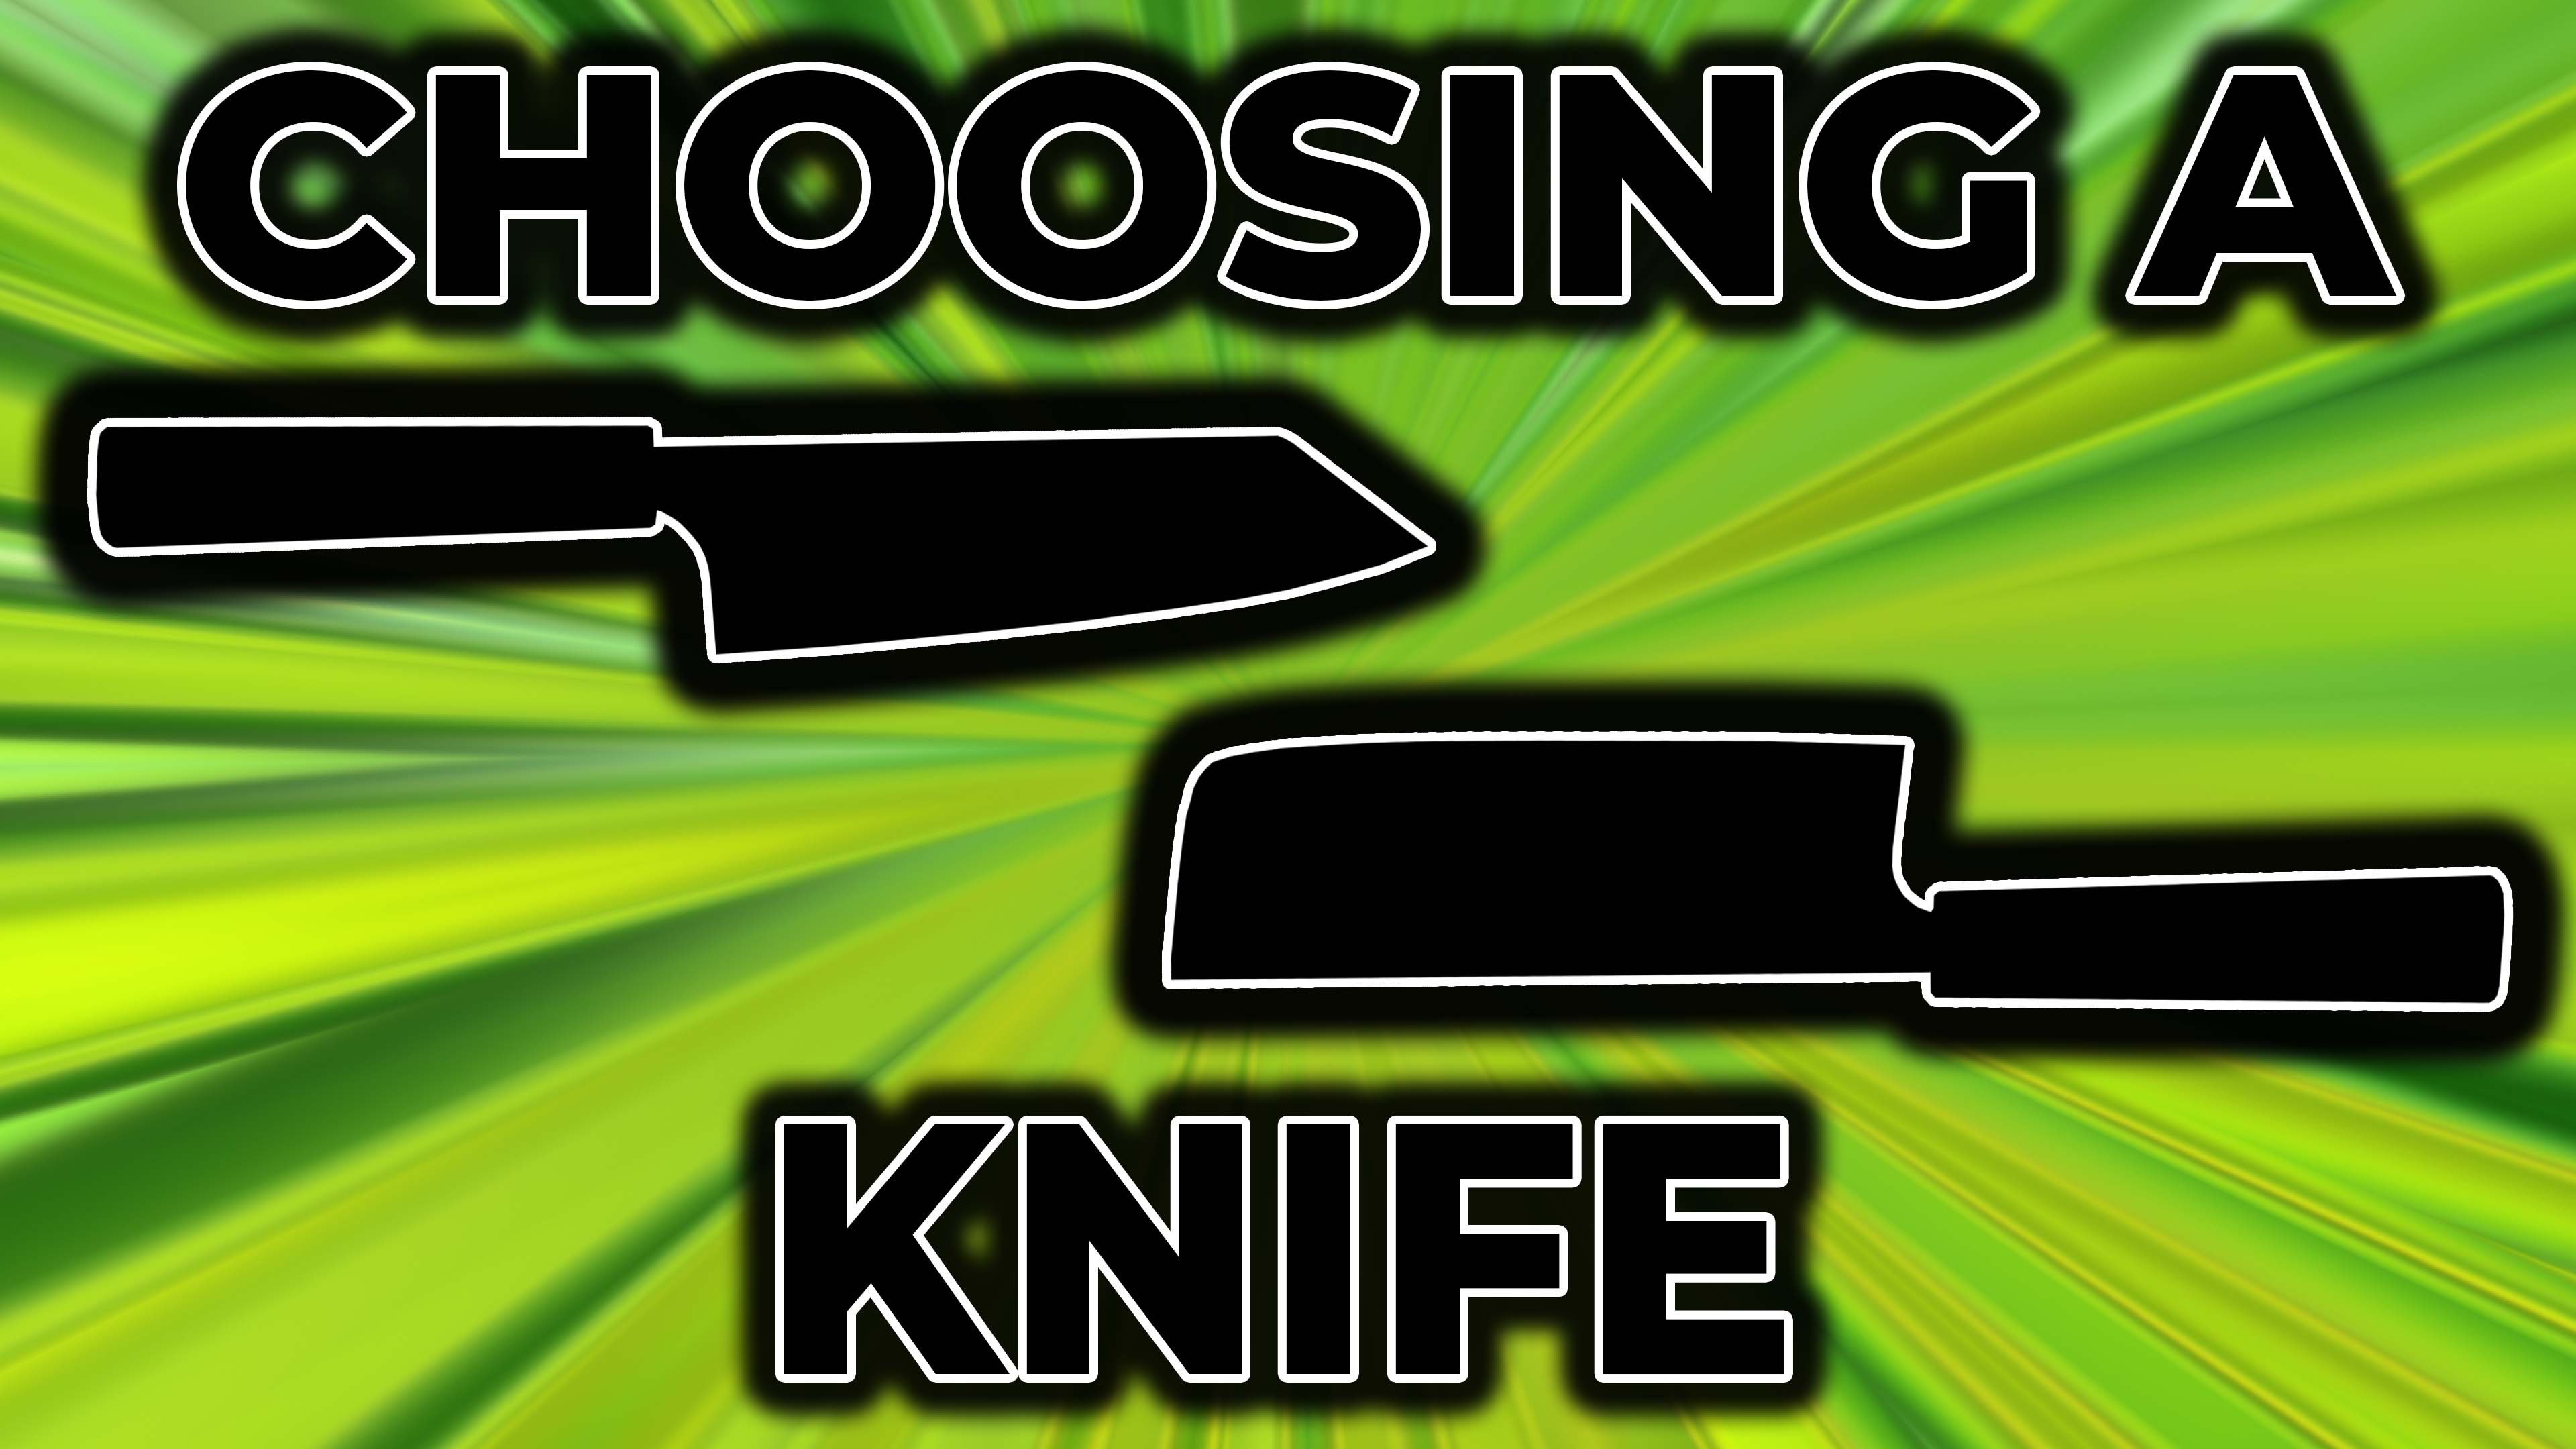 How to Choose a knife